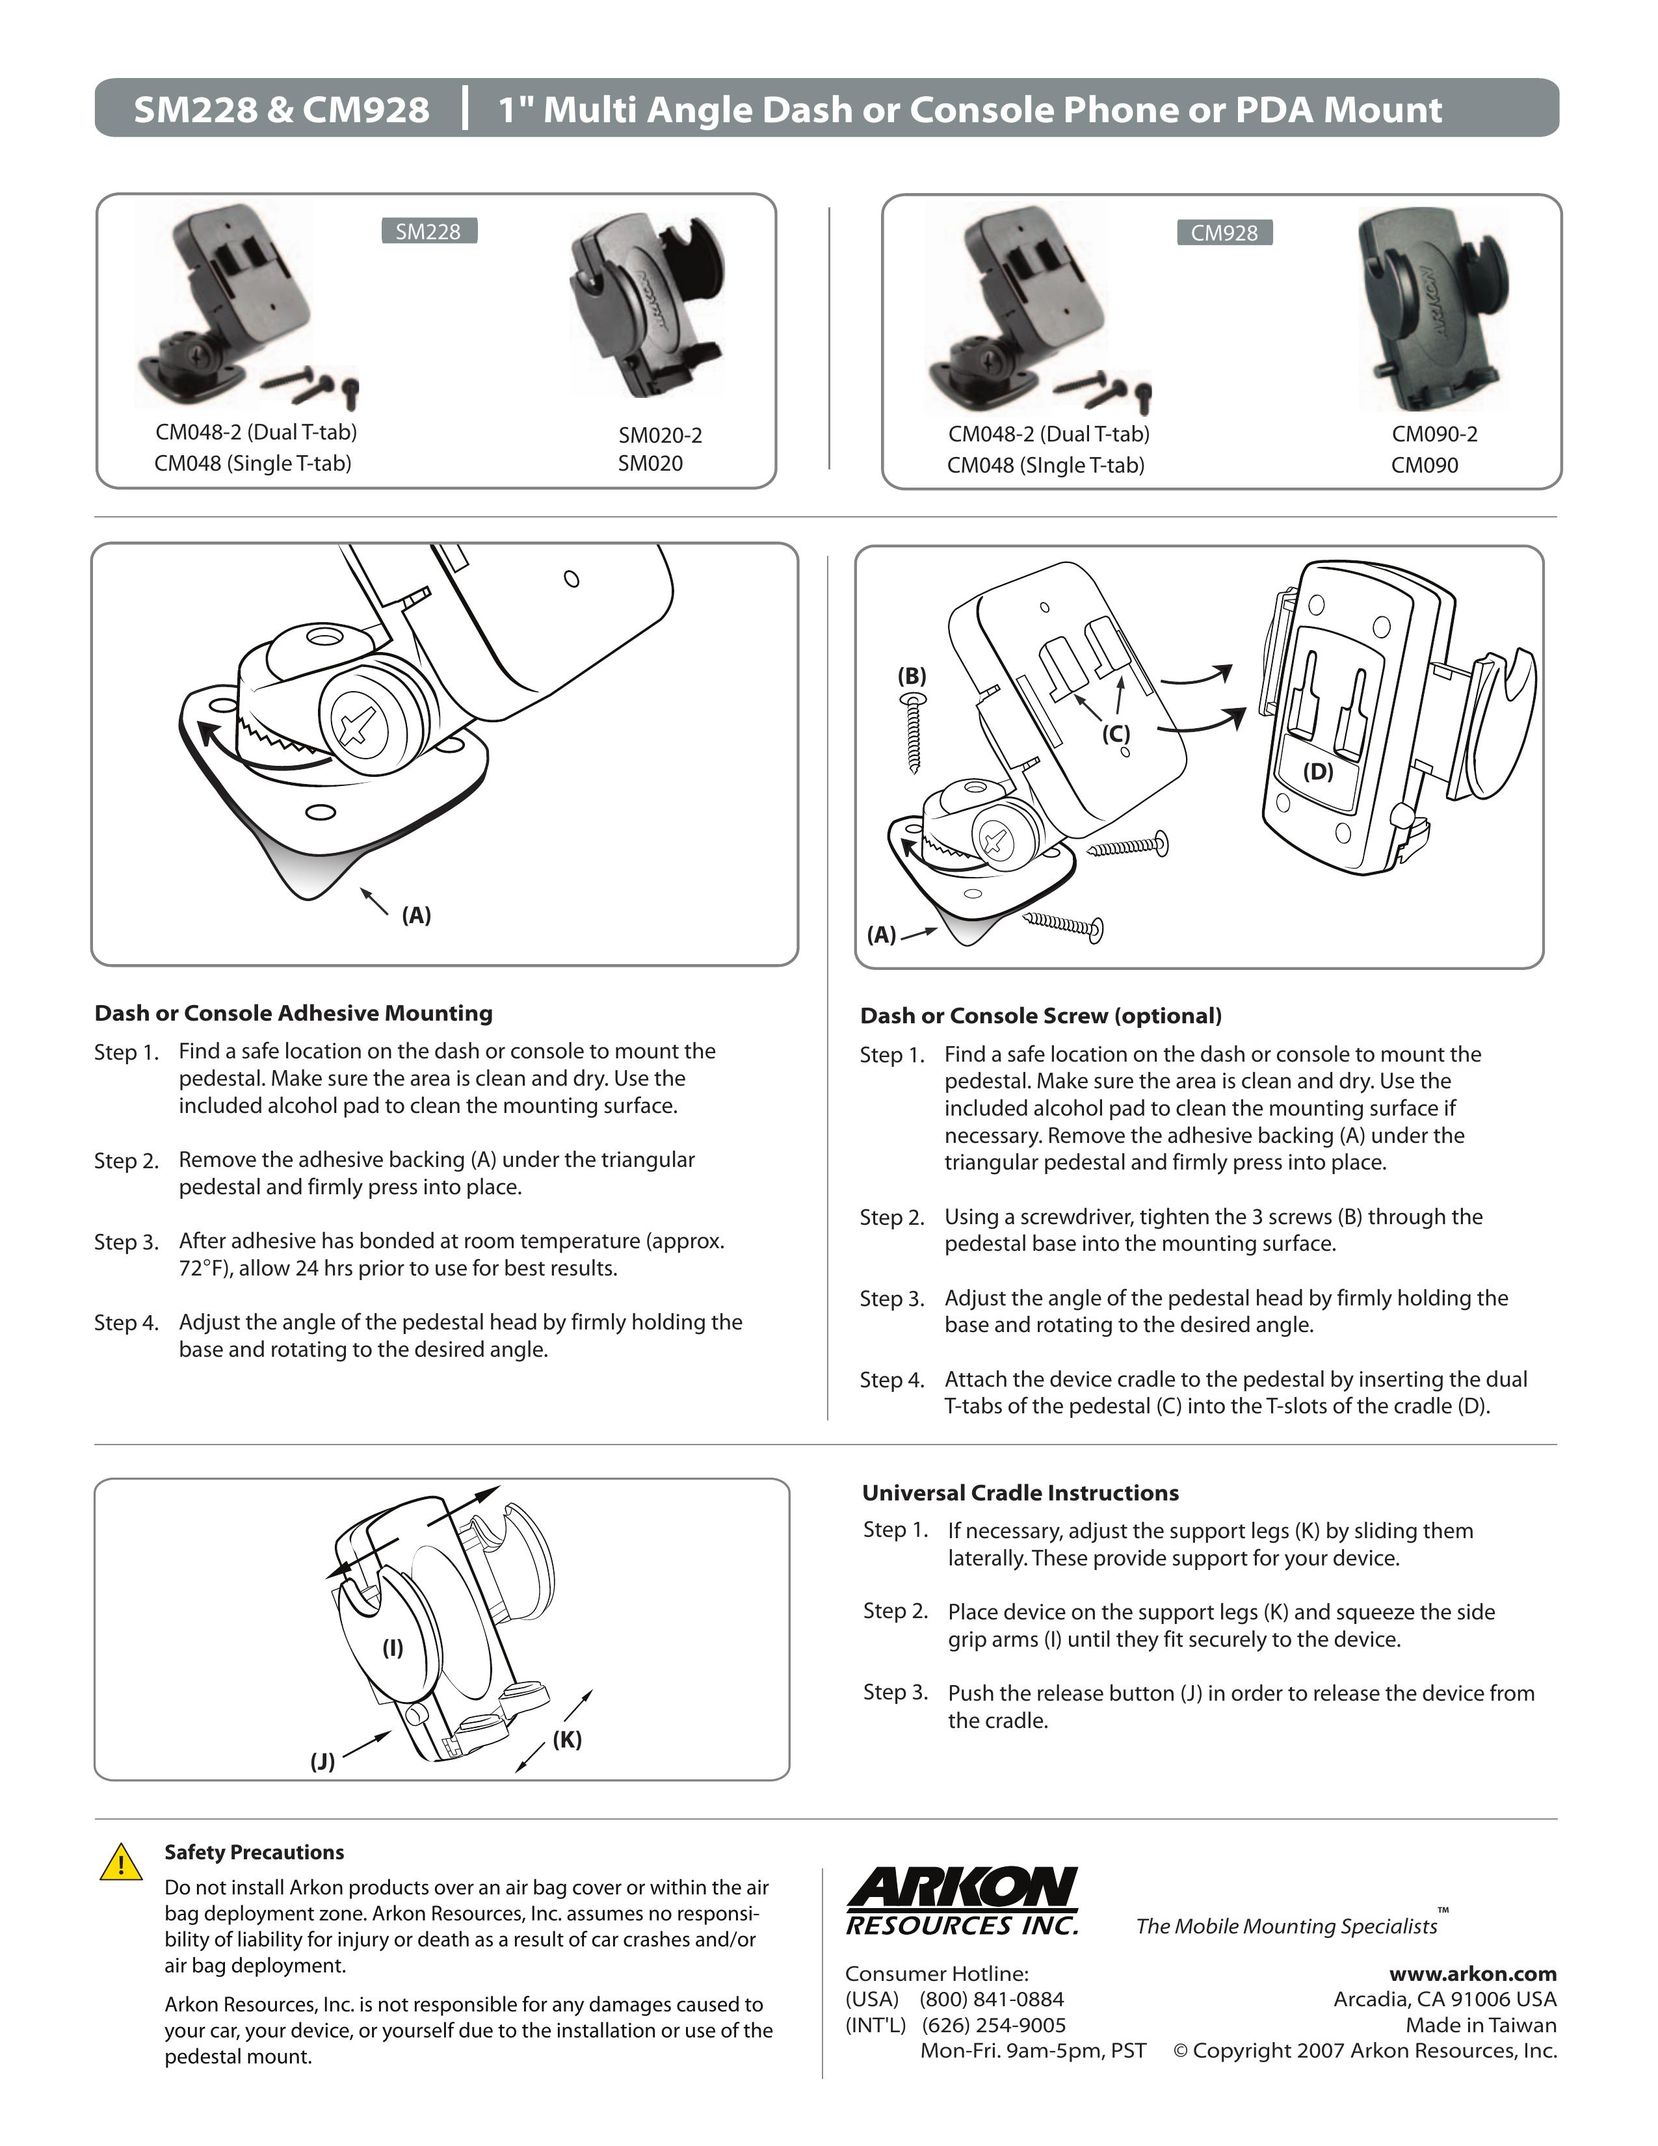 Arkon SM228 Cell Phone Accessories User Manual